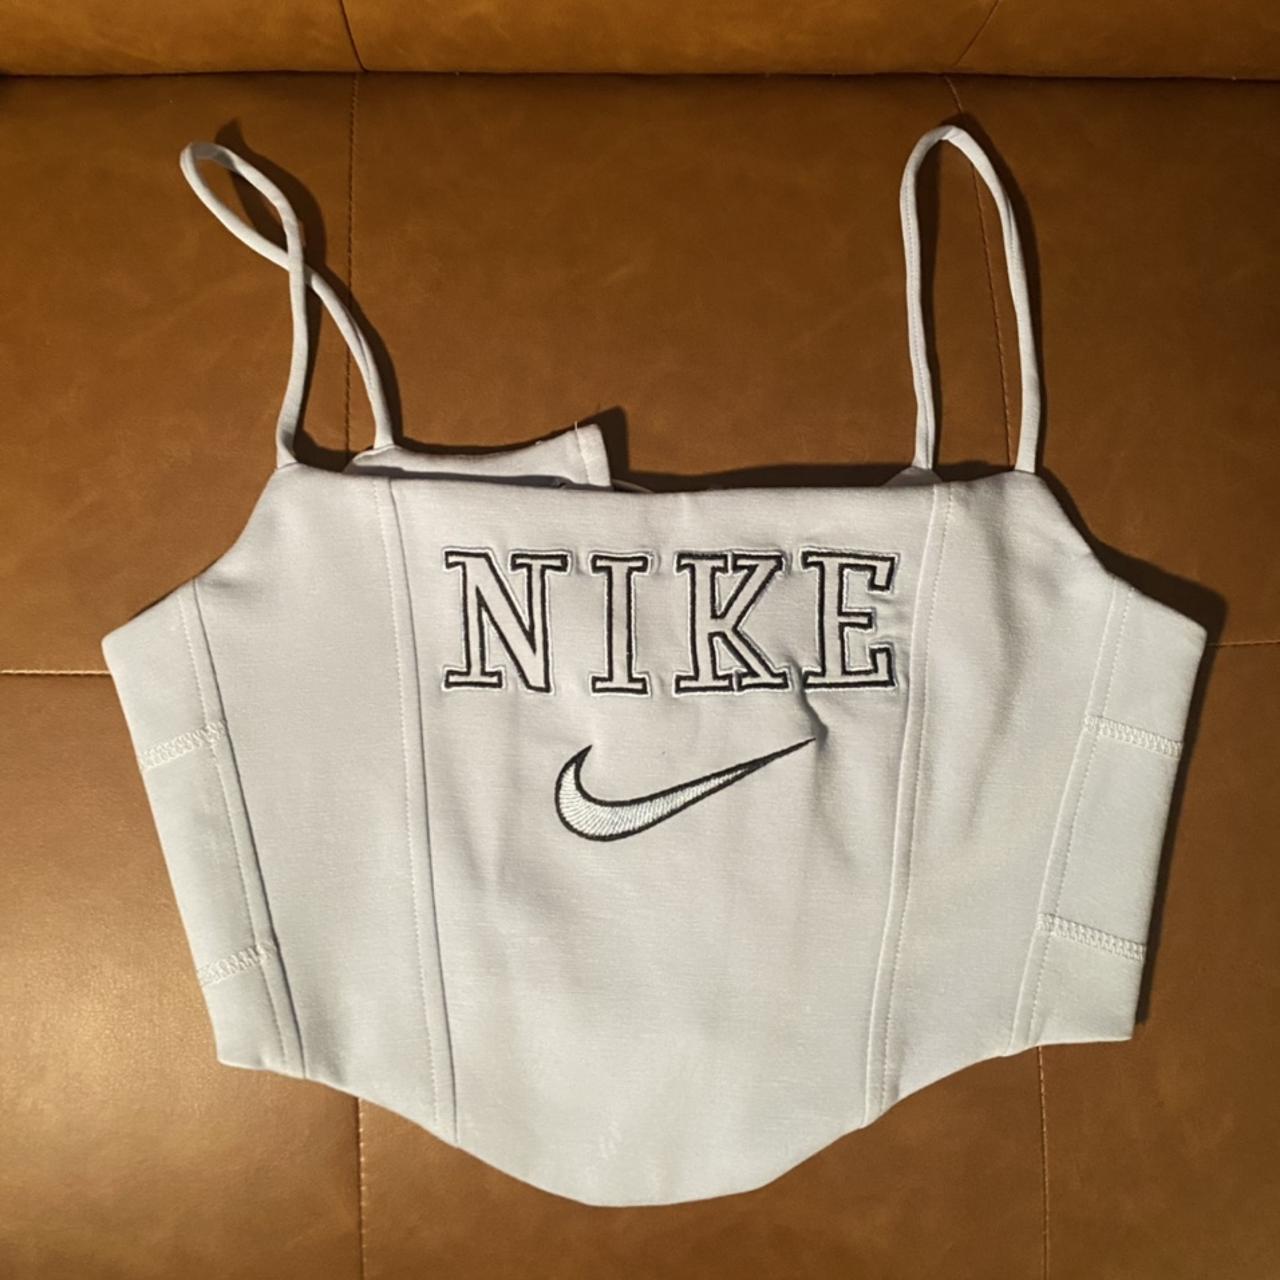 Baby blue Nike corset top with tie closure in back.